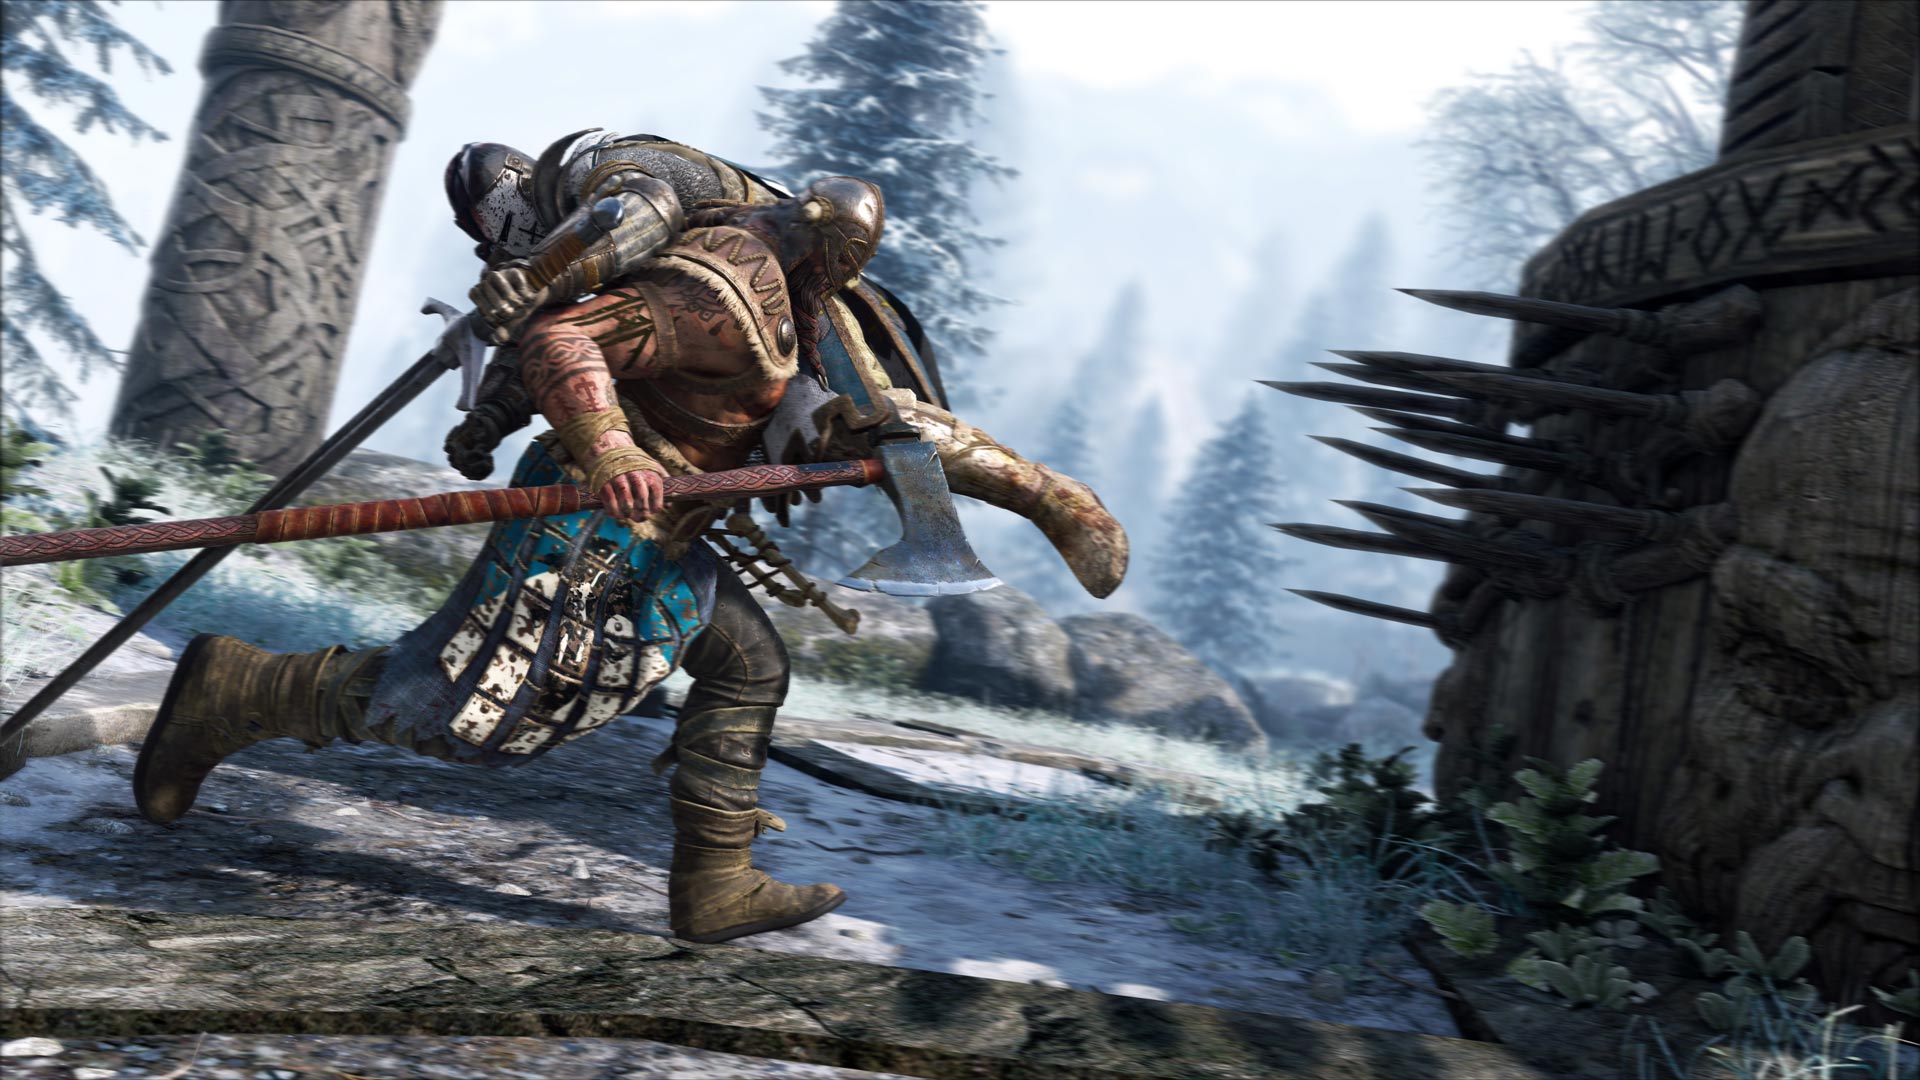 Video Game For Honor HD Wallpaper